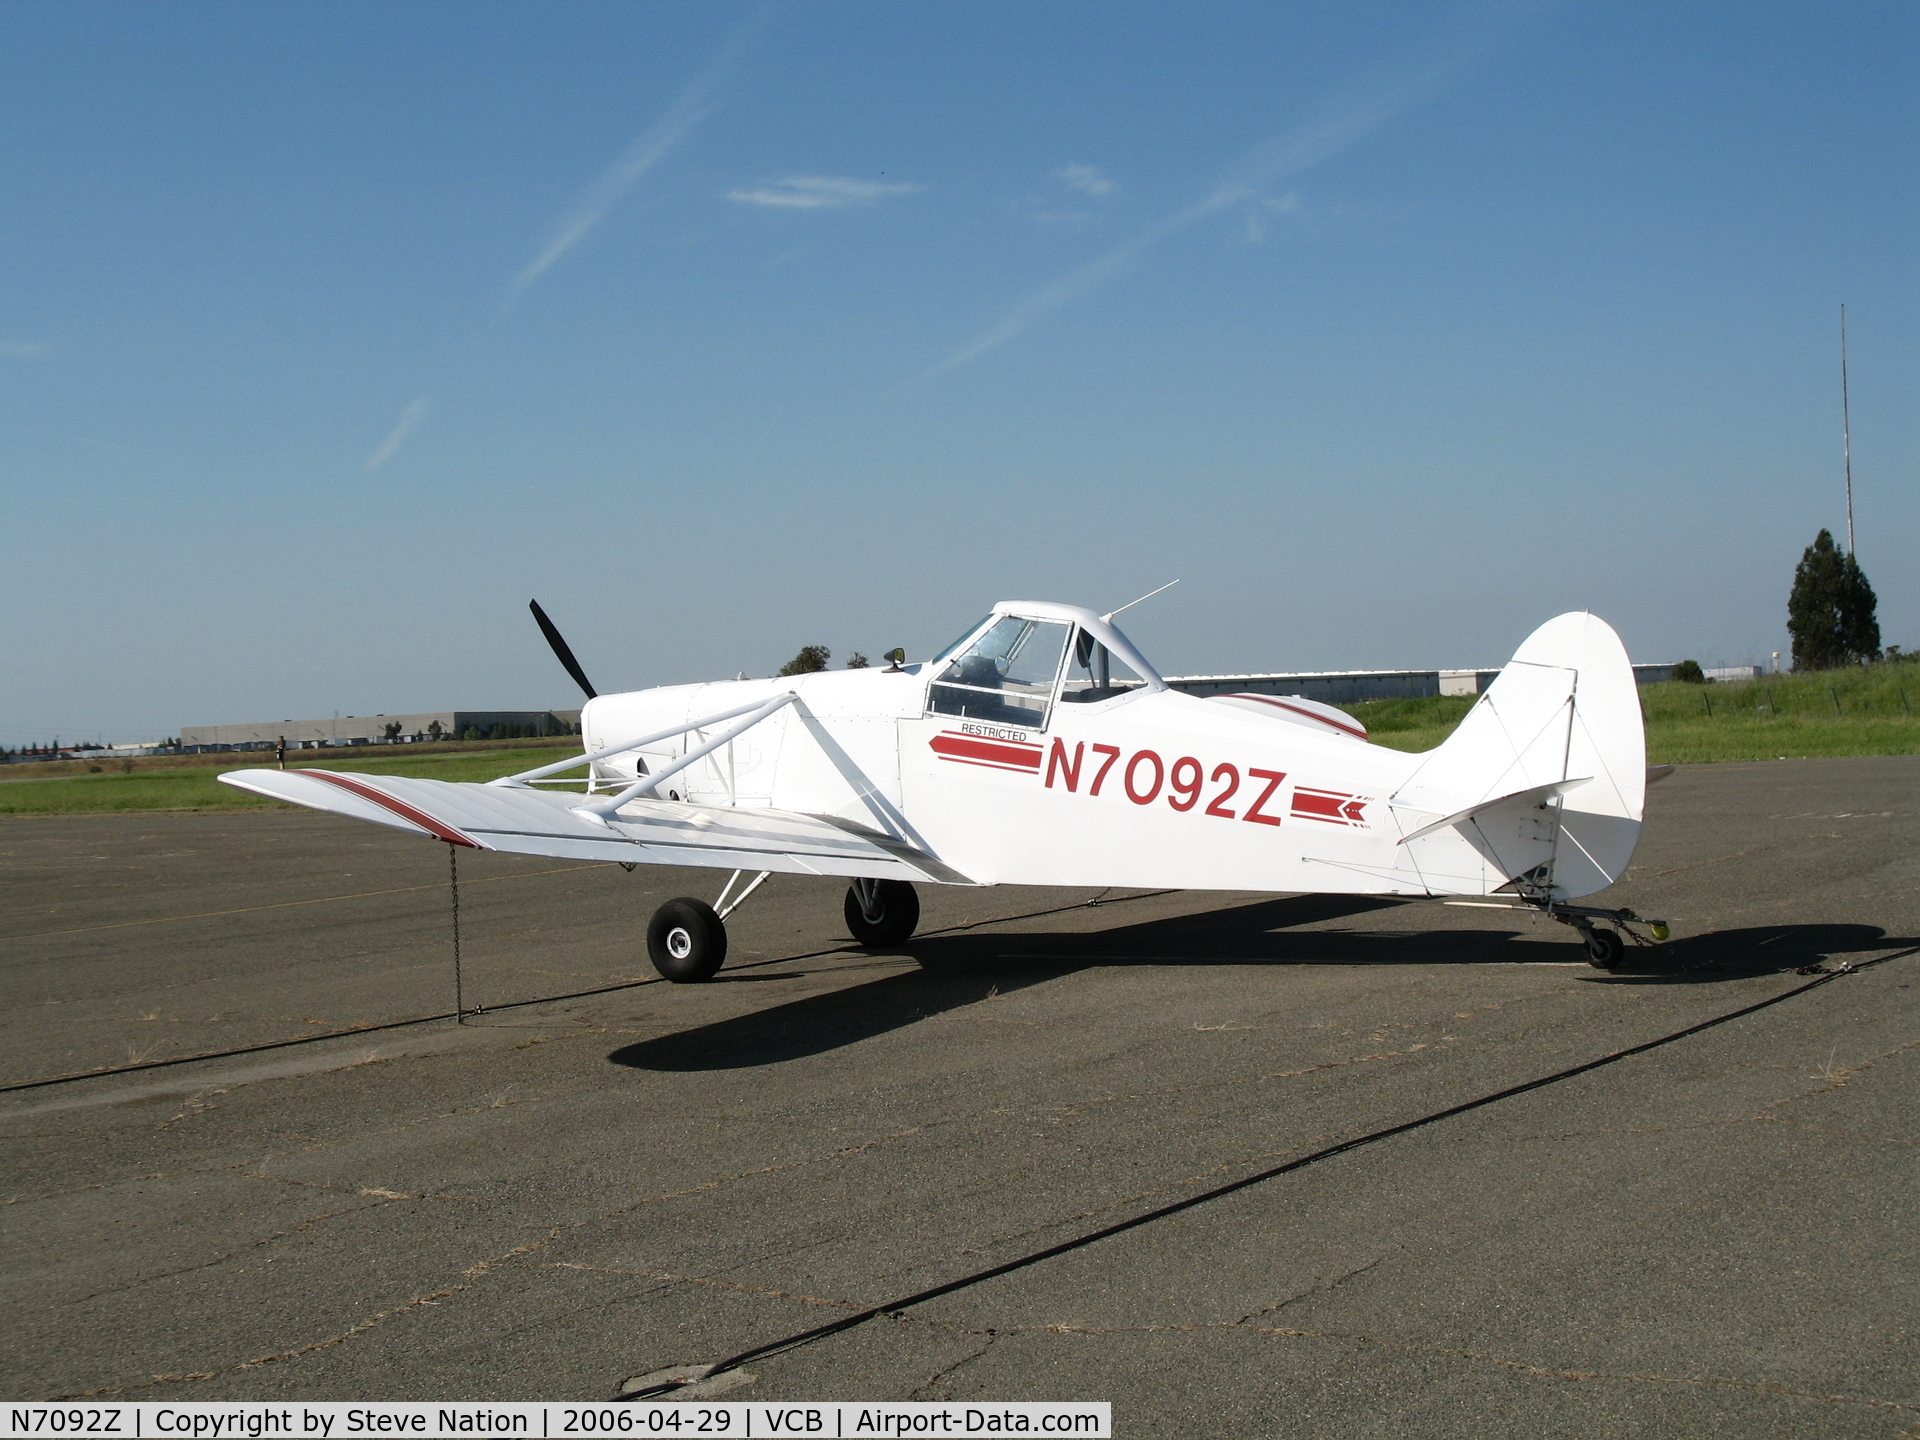 N7092Z, 1964 Piper PA-25-235 C/N 25-2879, 1964 Piper PA-25-235 Pawnee glider tug @ Nut Tree Airport, Vacaville, CA